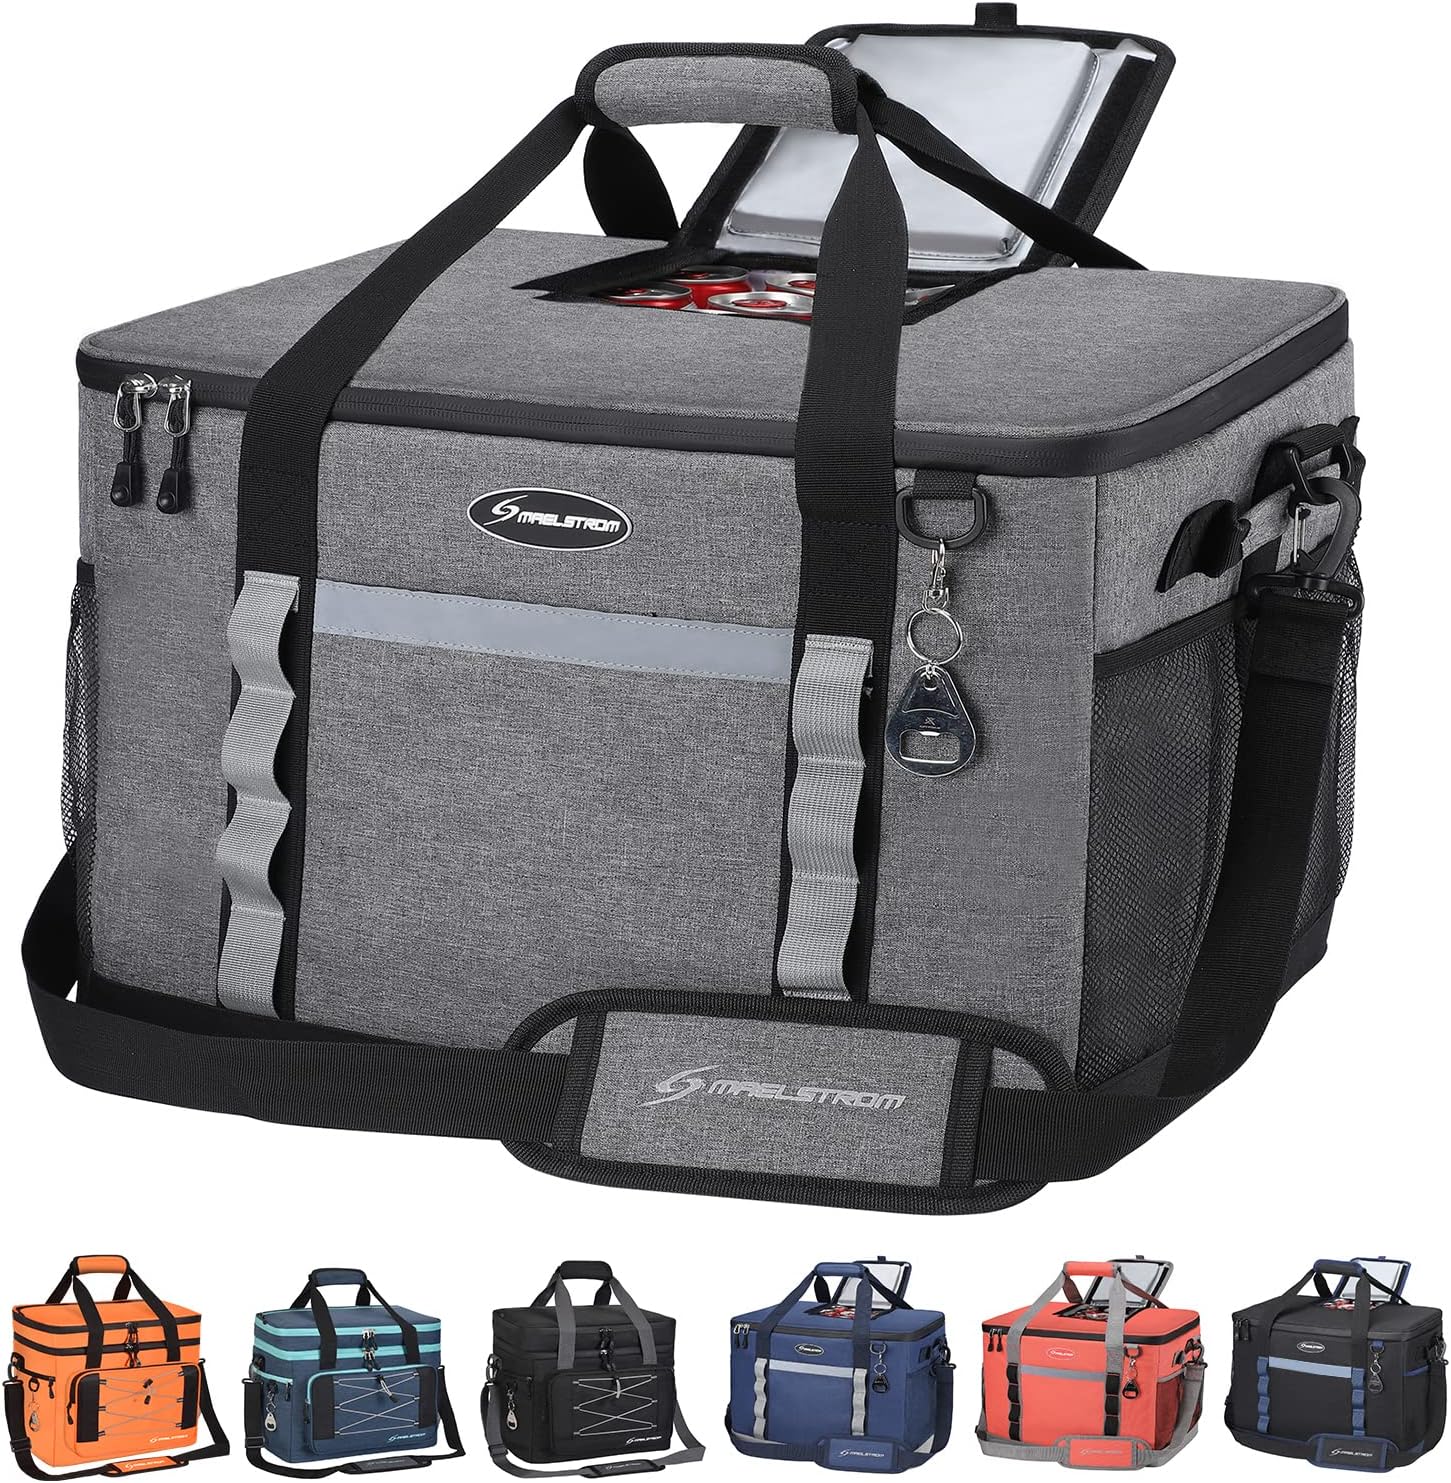 Maelstrom Soft Cooler Bag,Collapsible Soft Sided [...]